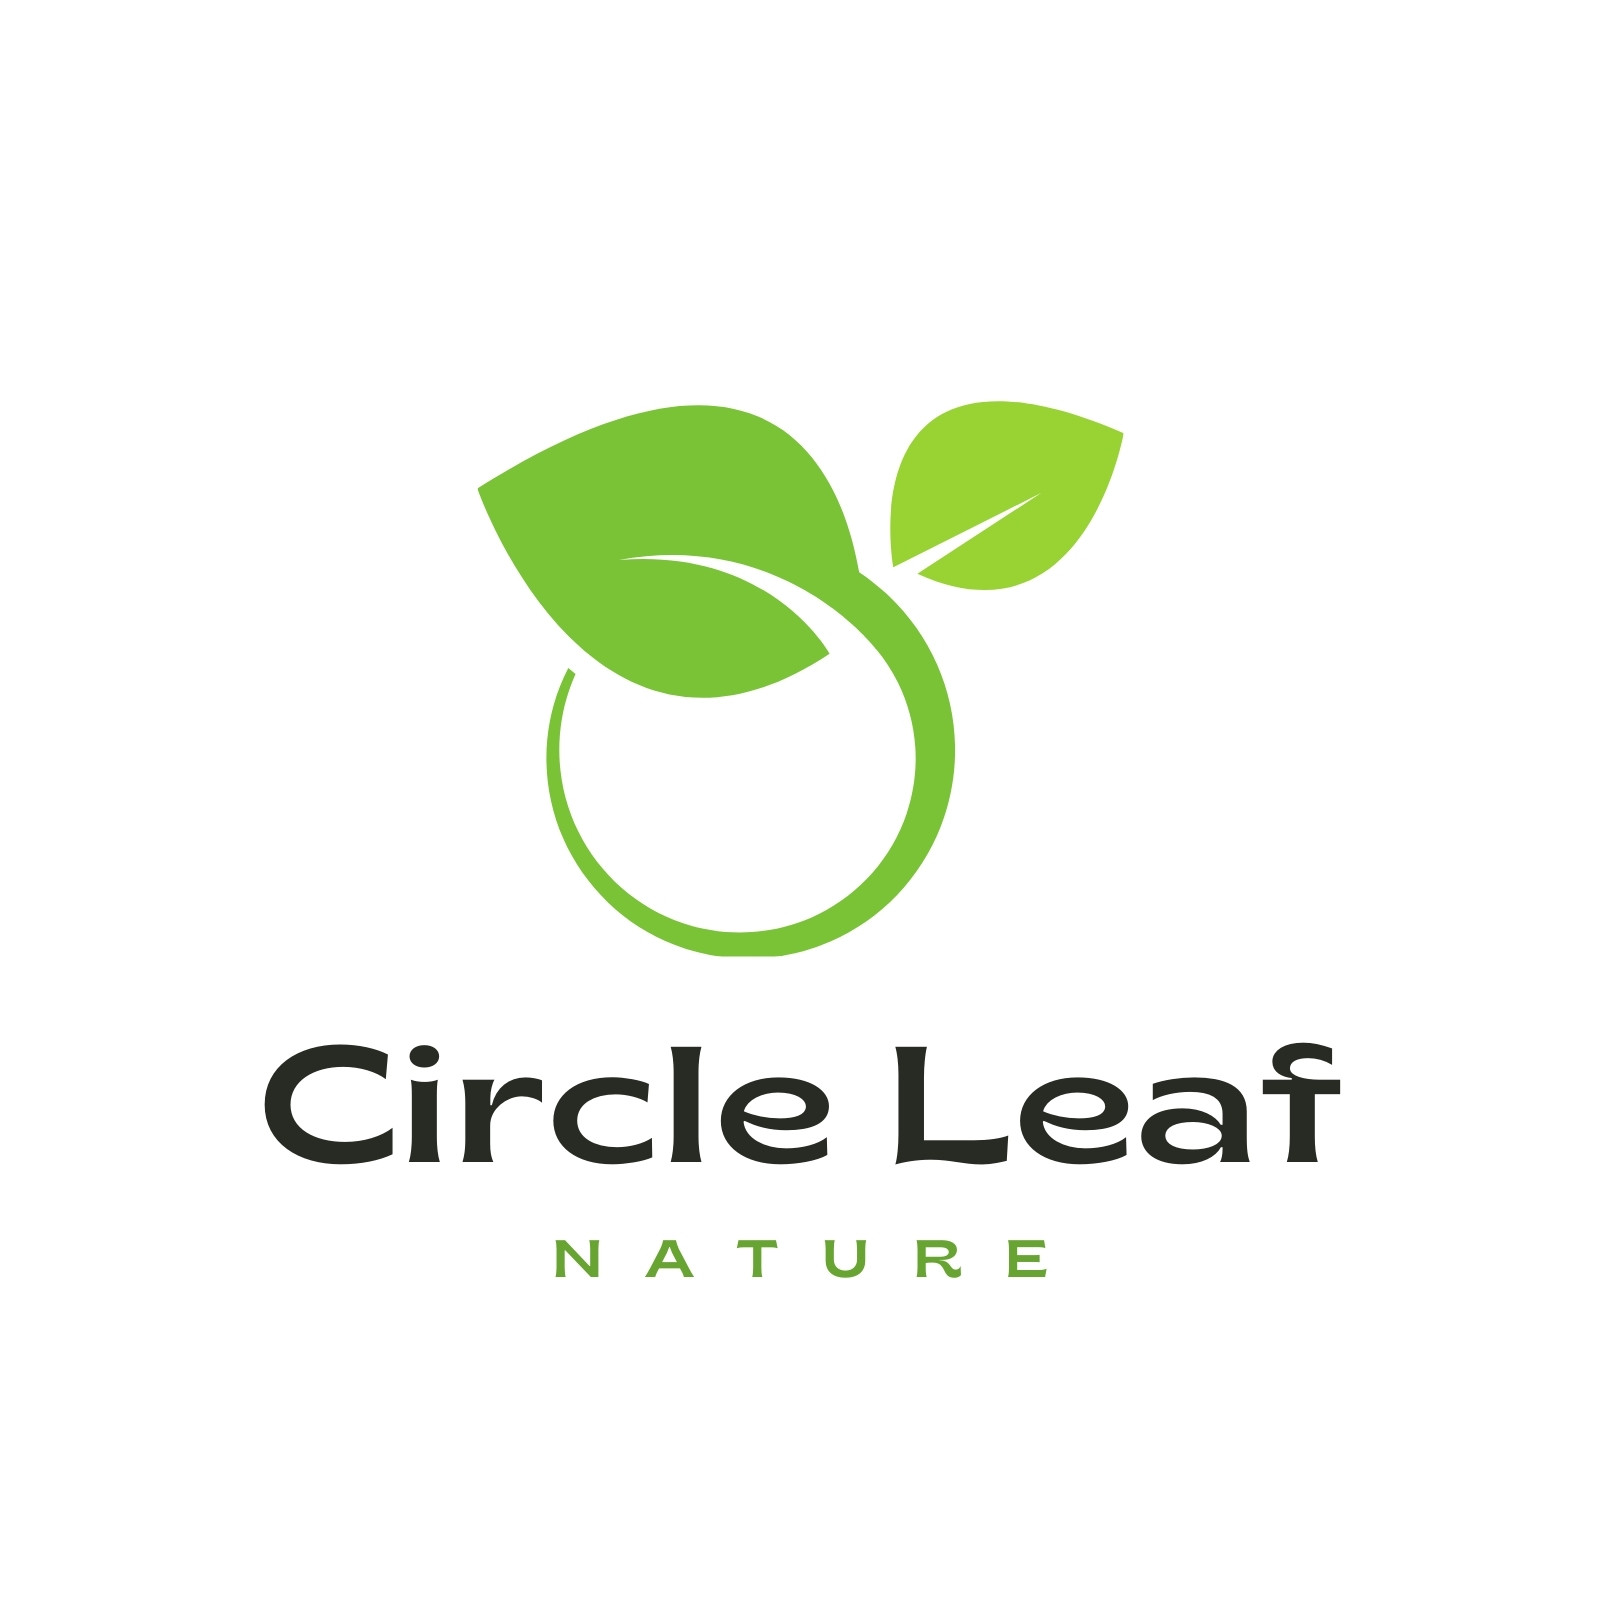 Leaf Round Vector PNG, Vector, PSD, and Clipart With Transparent Background  for Free Download | Pngtree